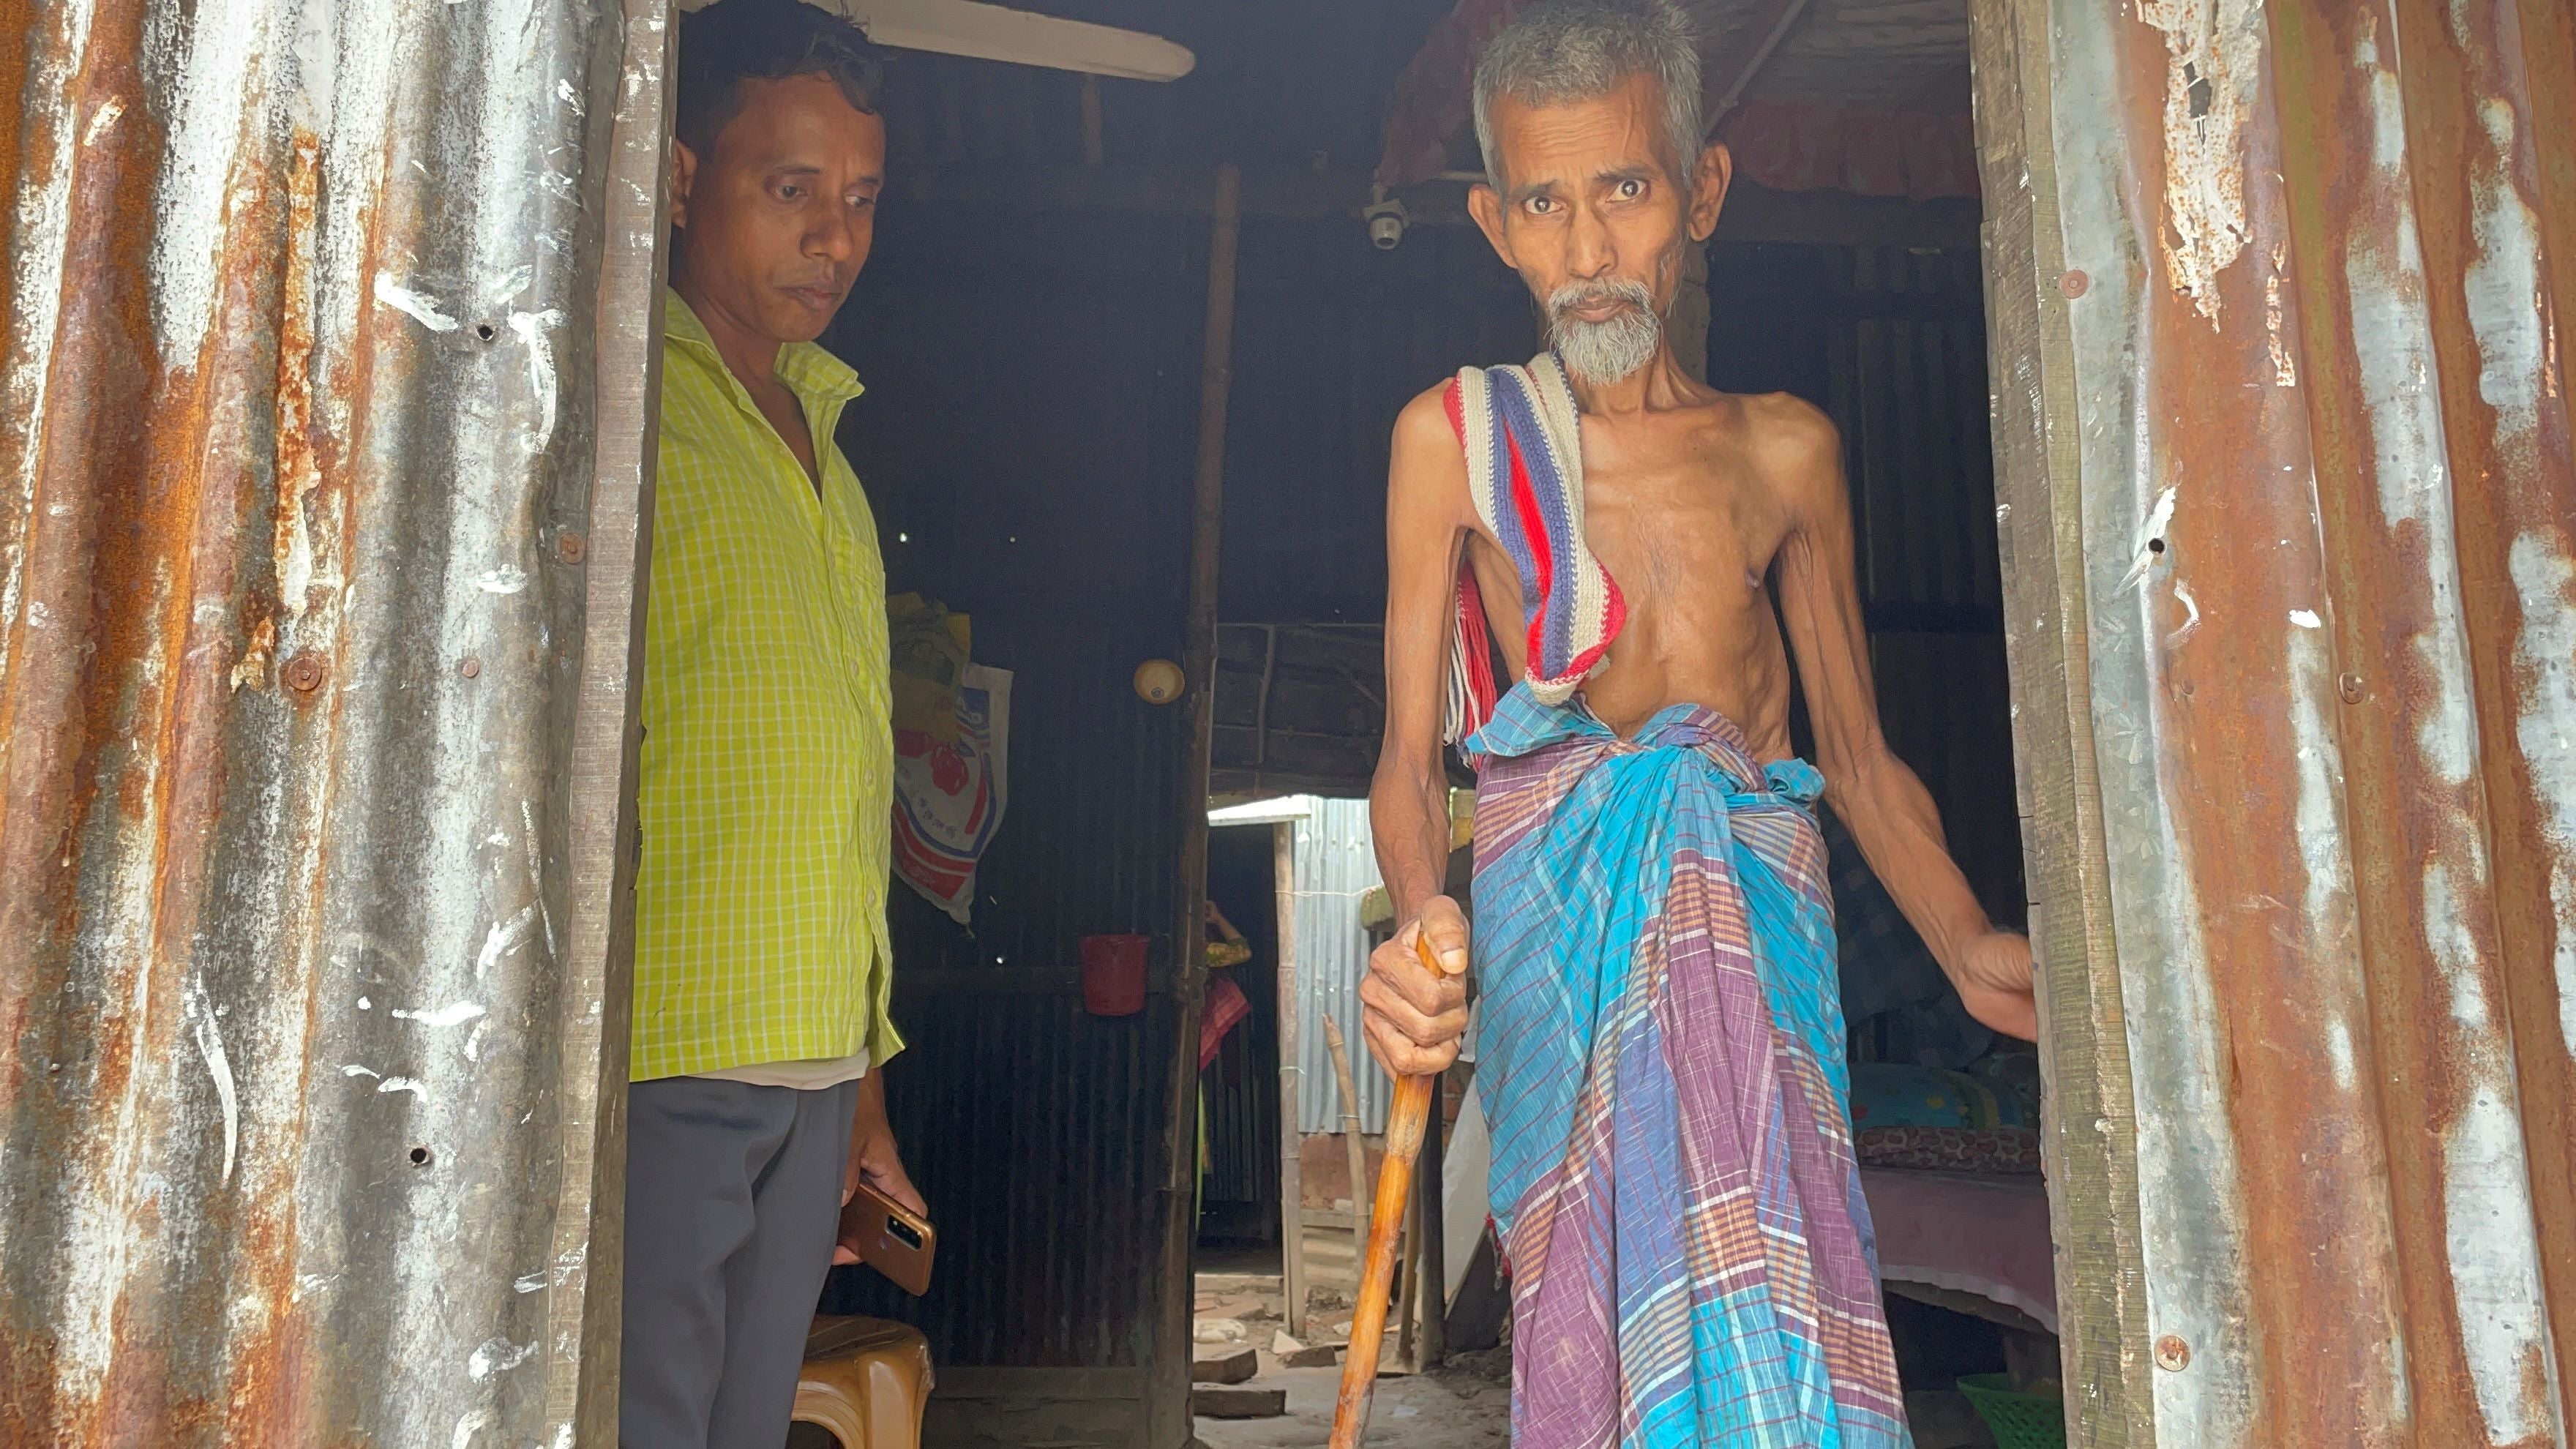 A older man stands in a doorway next to his son